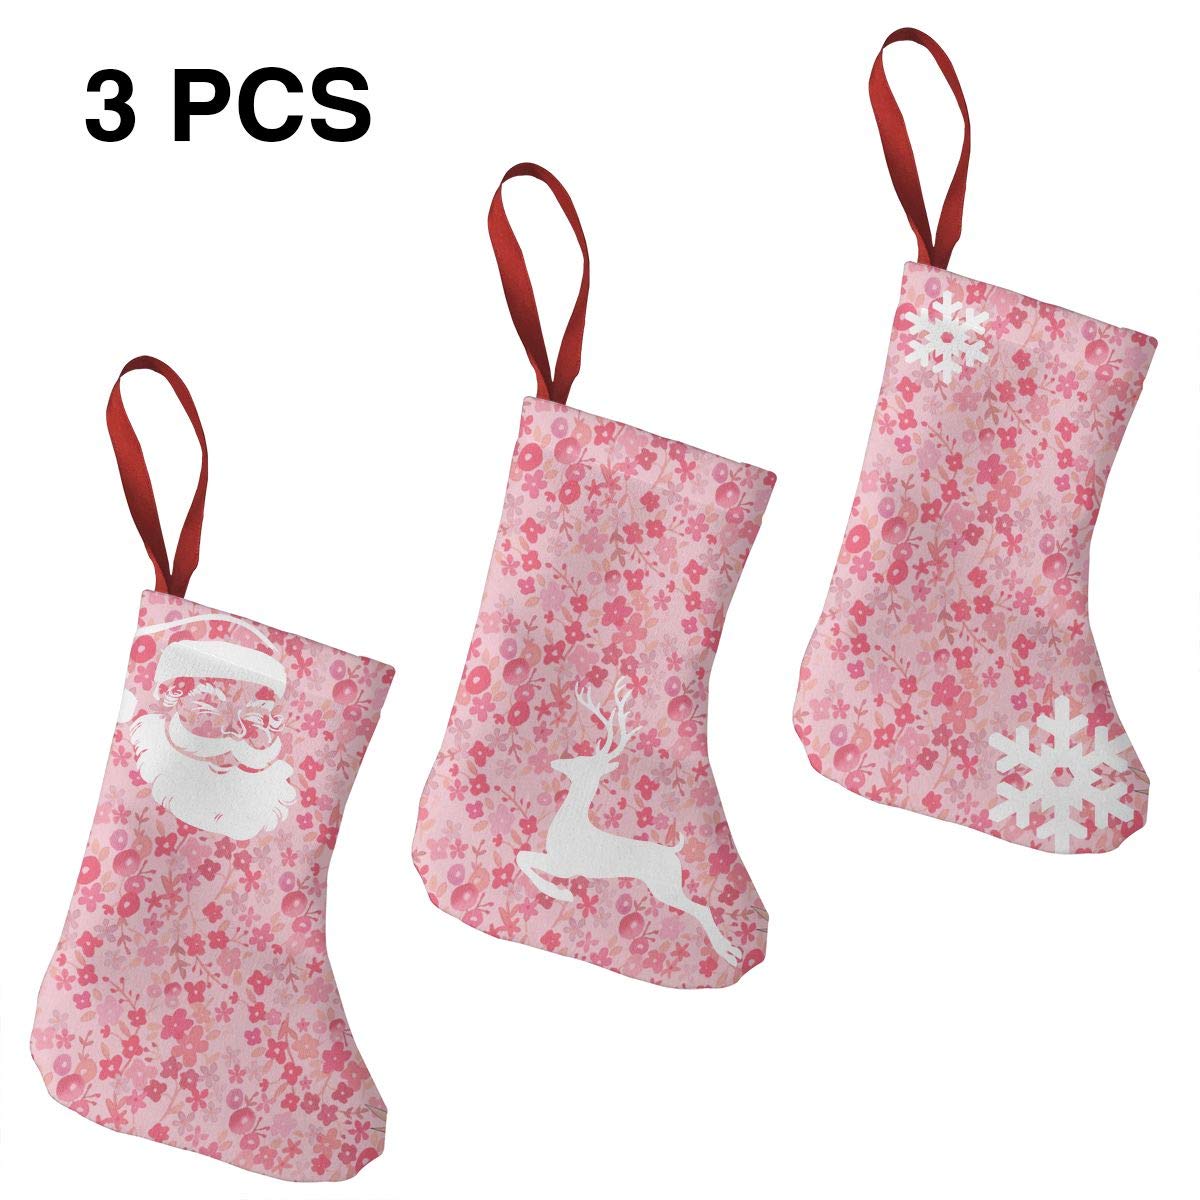 Classy Girly Wallpapers Flowers Xmas Christmas Stockings - Christmas Chicken Stocking 3 Amazon , HD Wallpaper & Backgrounds